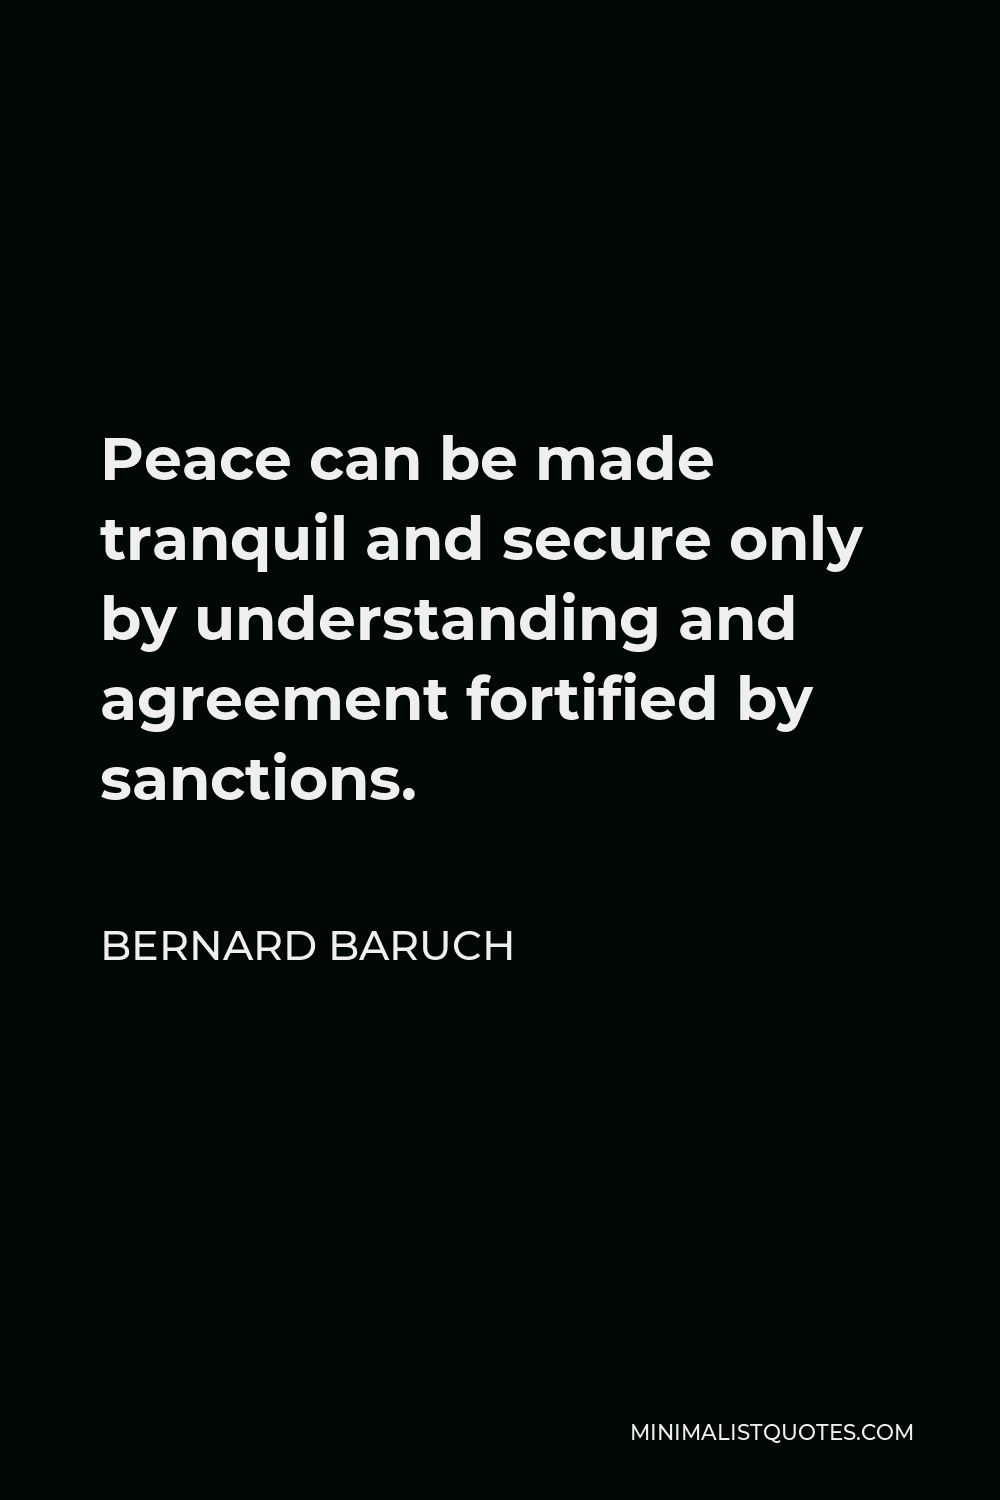 Bernard Baruch Quote - Peace can be made tranquil and secure only by understanding and agreement fortified by sanctions.